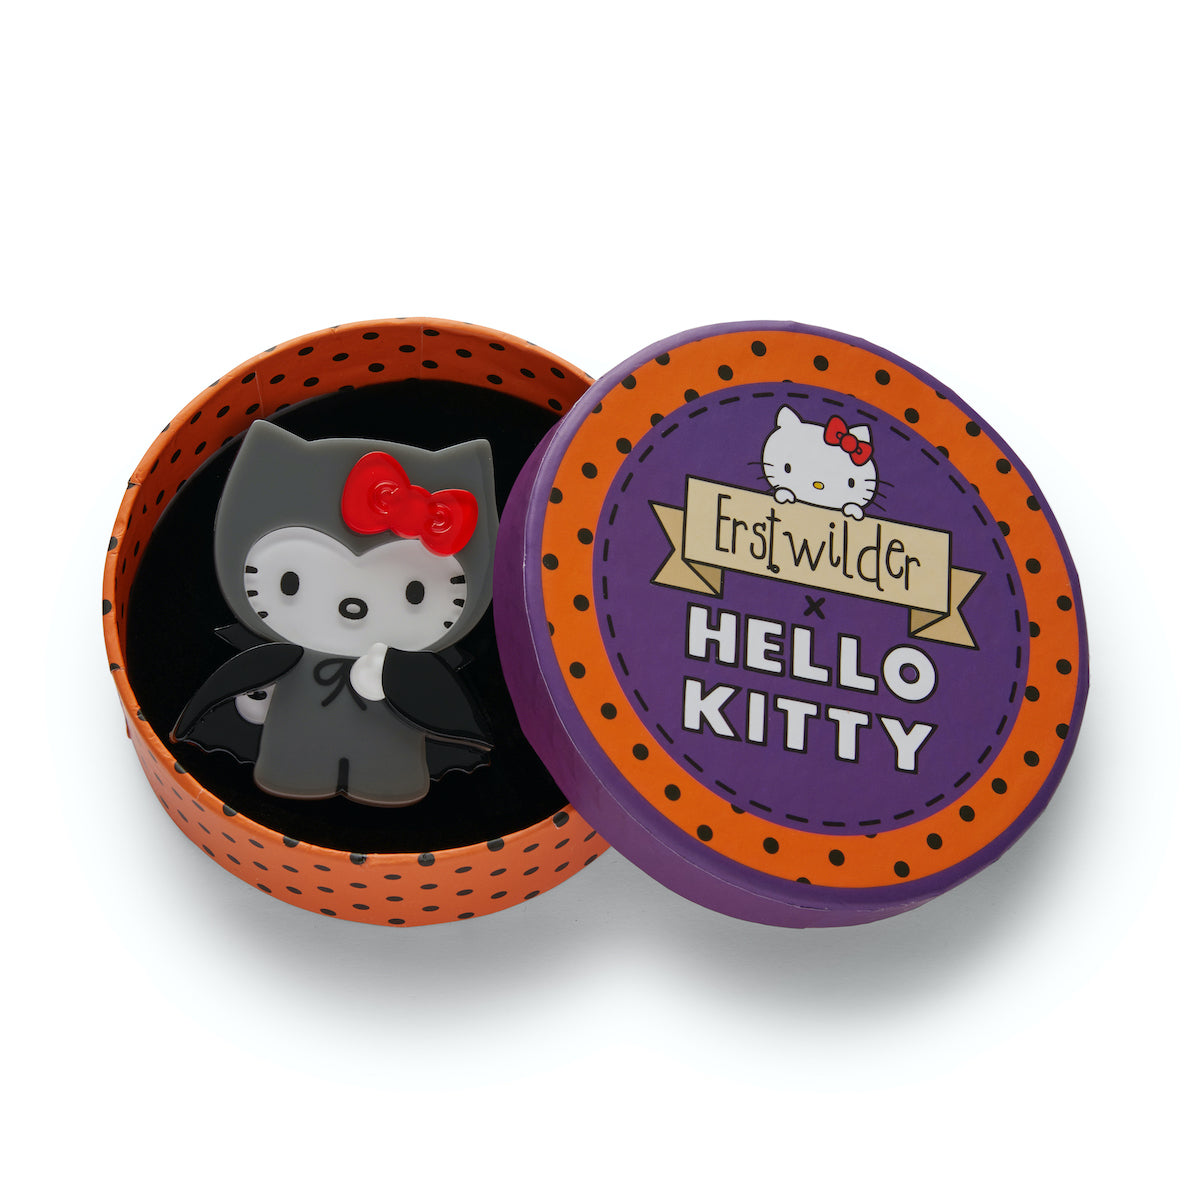 HELLO KITTY COUNT WITH KITTY BROOCH